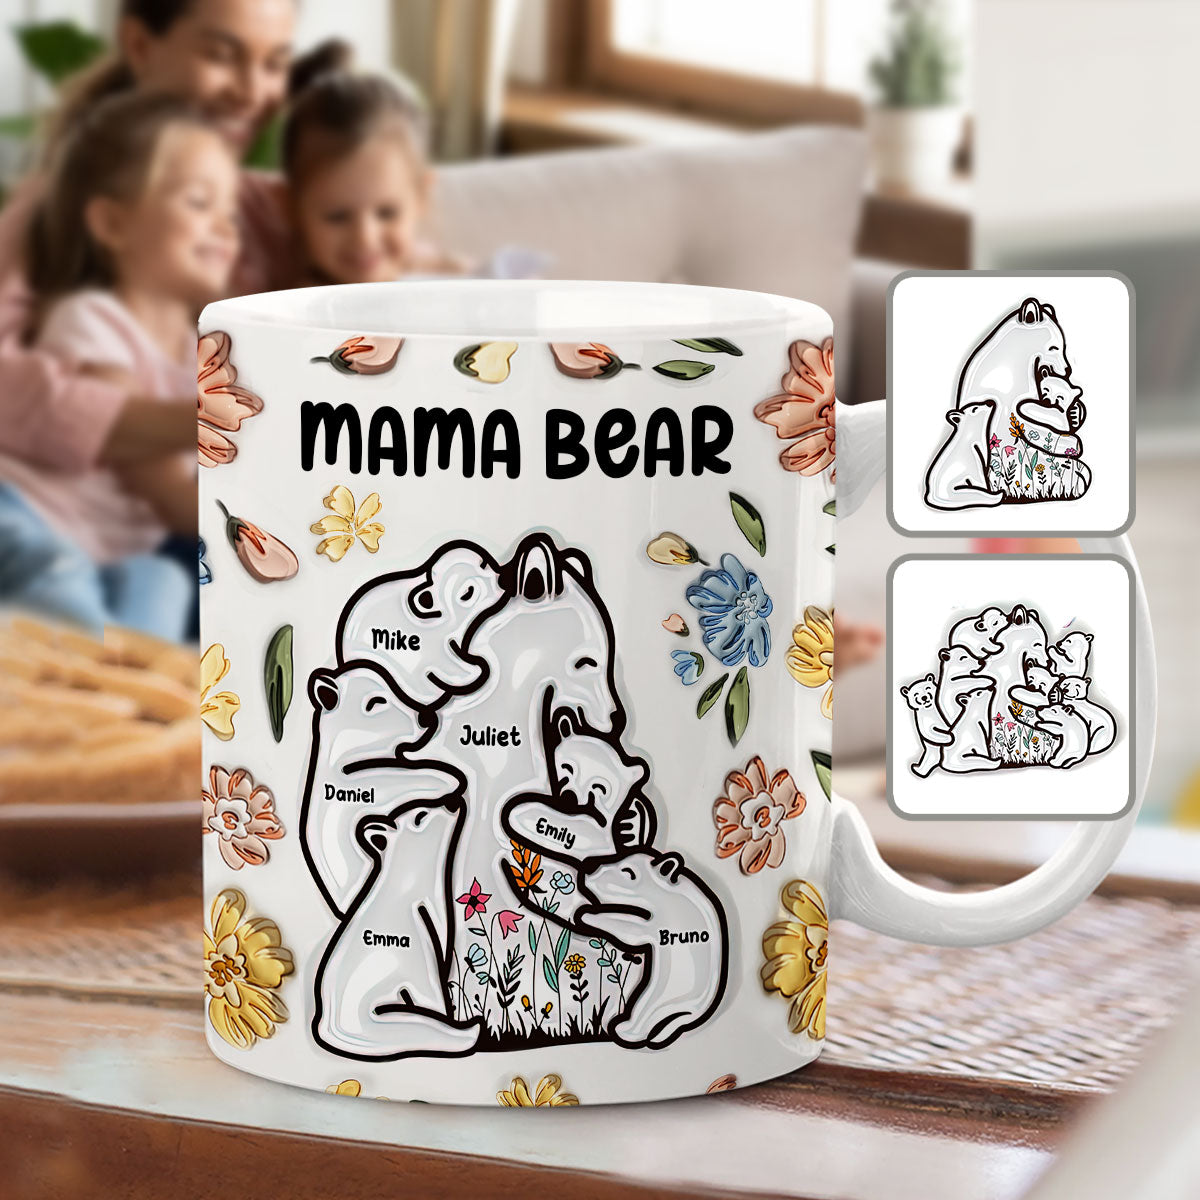 Mama Bear Huggings Her Cubs Floral Style - Personalized Mother Mug